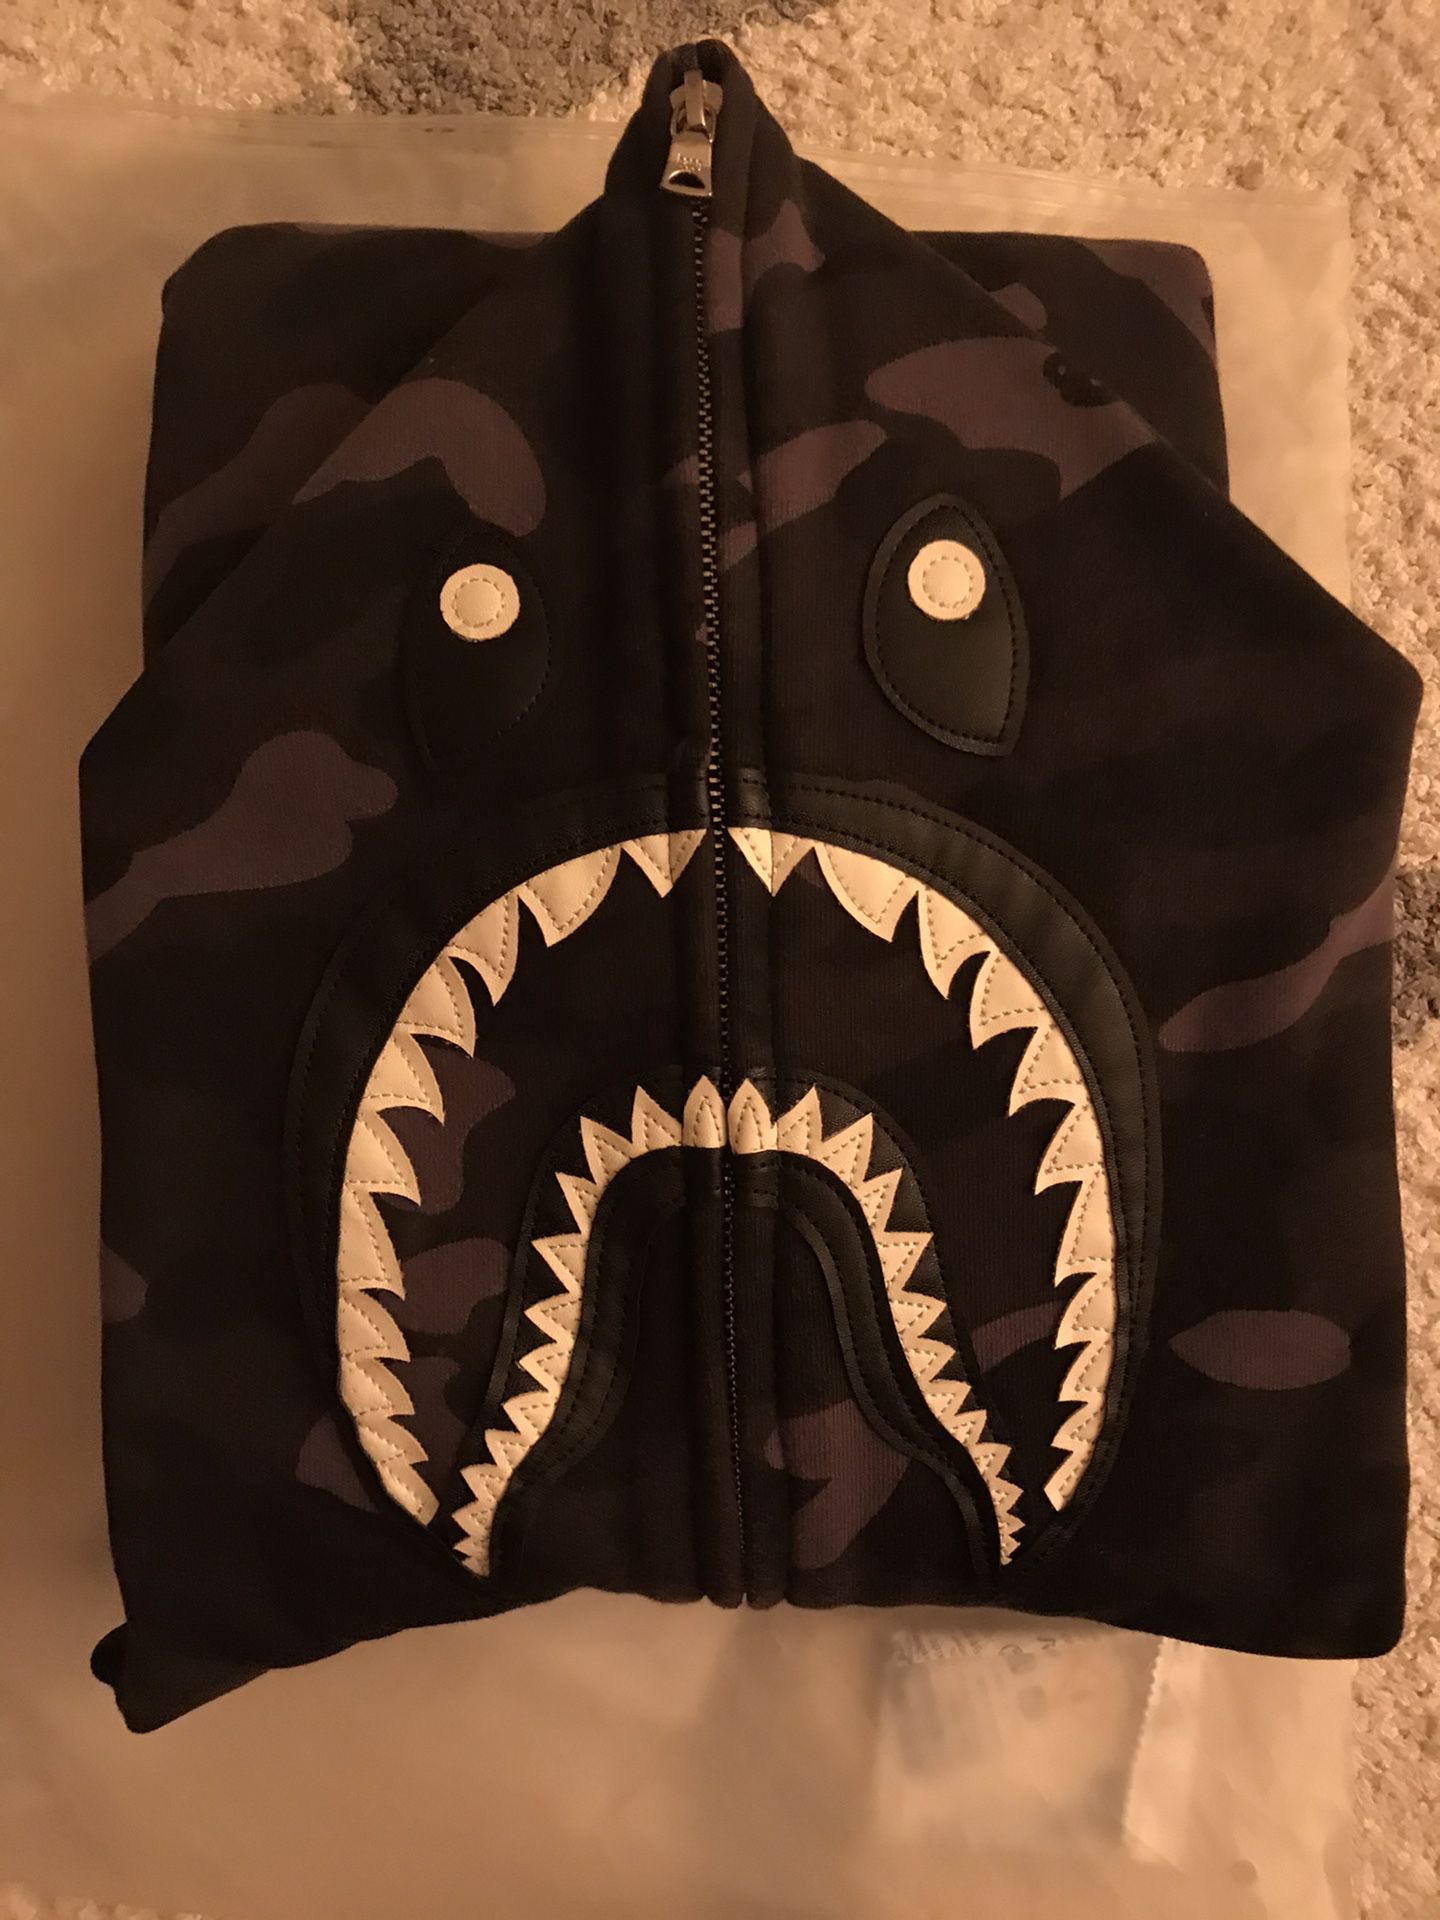 Bape x neighborhood hoodie Large pretty much new $1200 obo or trade Travis j1s %1000 authentic